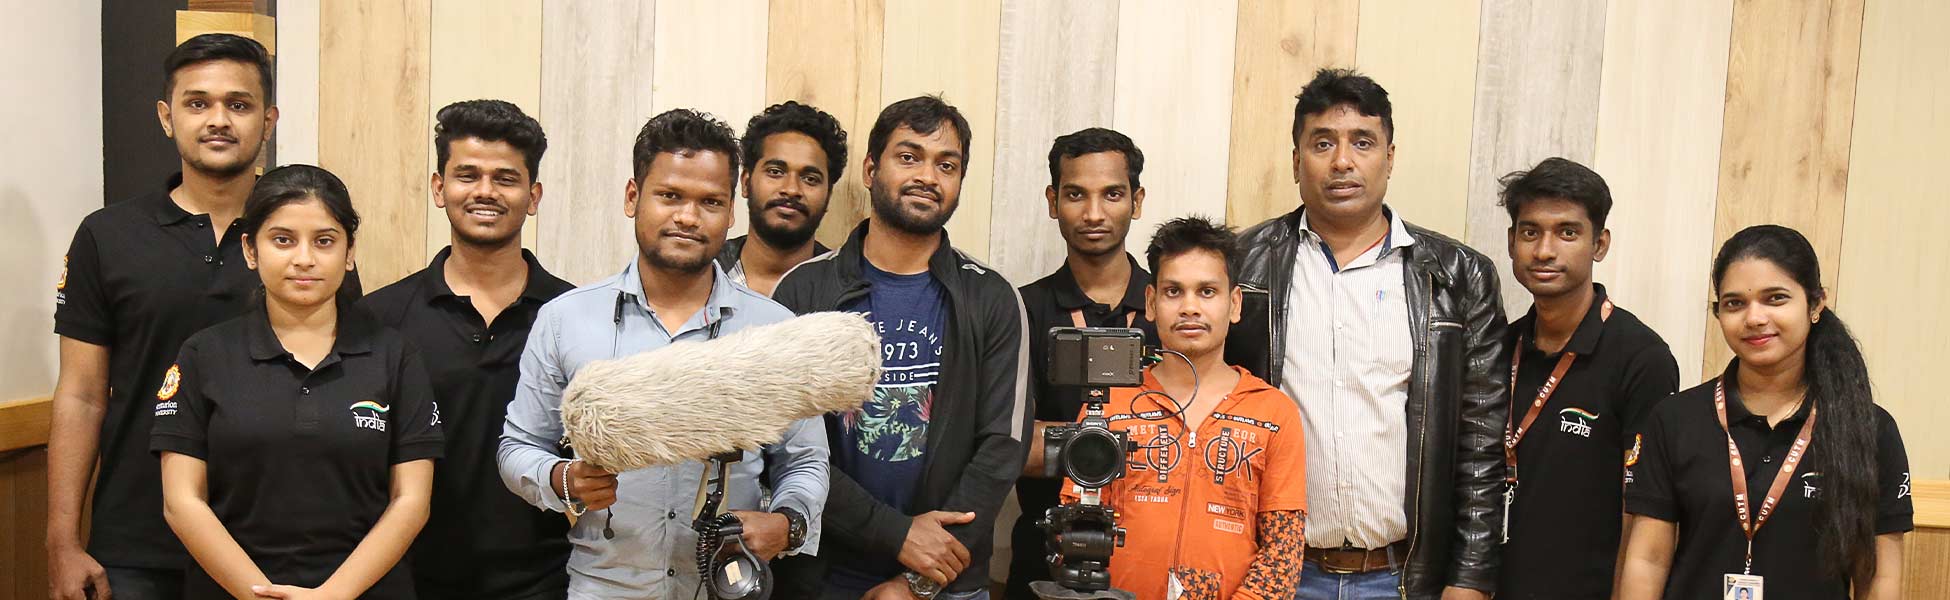 film production services in Lower Dibang Valley, video production services in Lower Dibang Valley, tv production services in Lower Dibang Valley, production services in Lower Dibang Valley